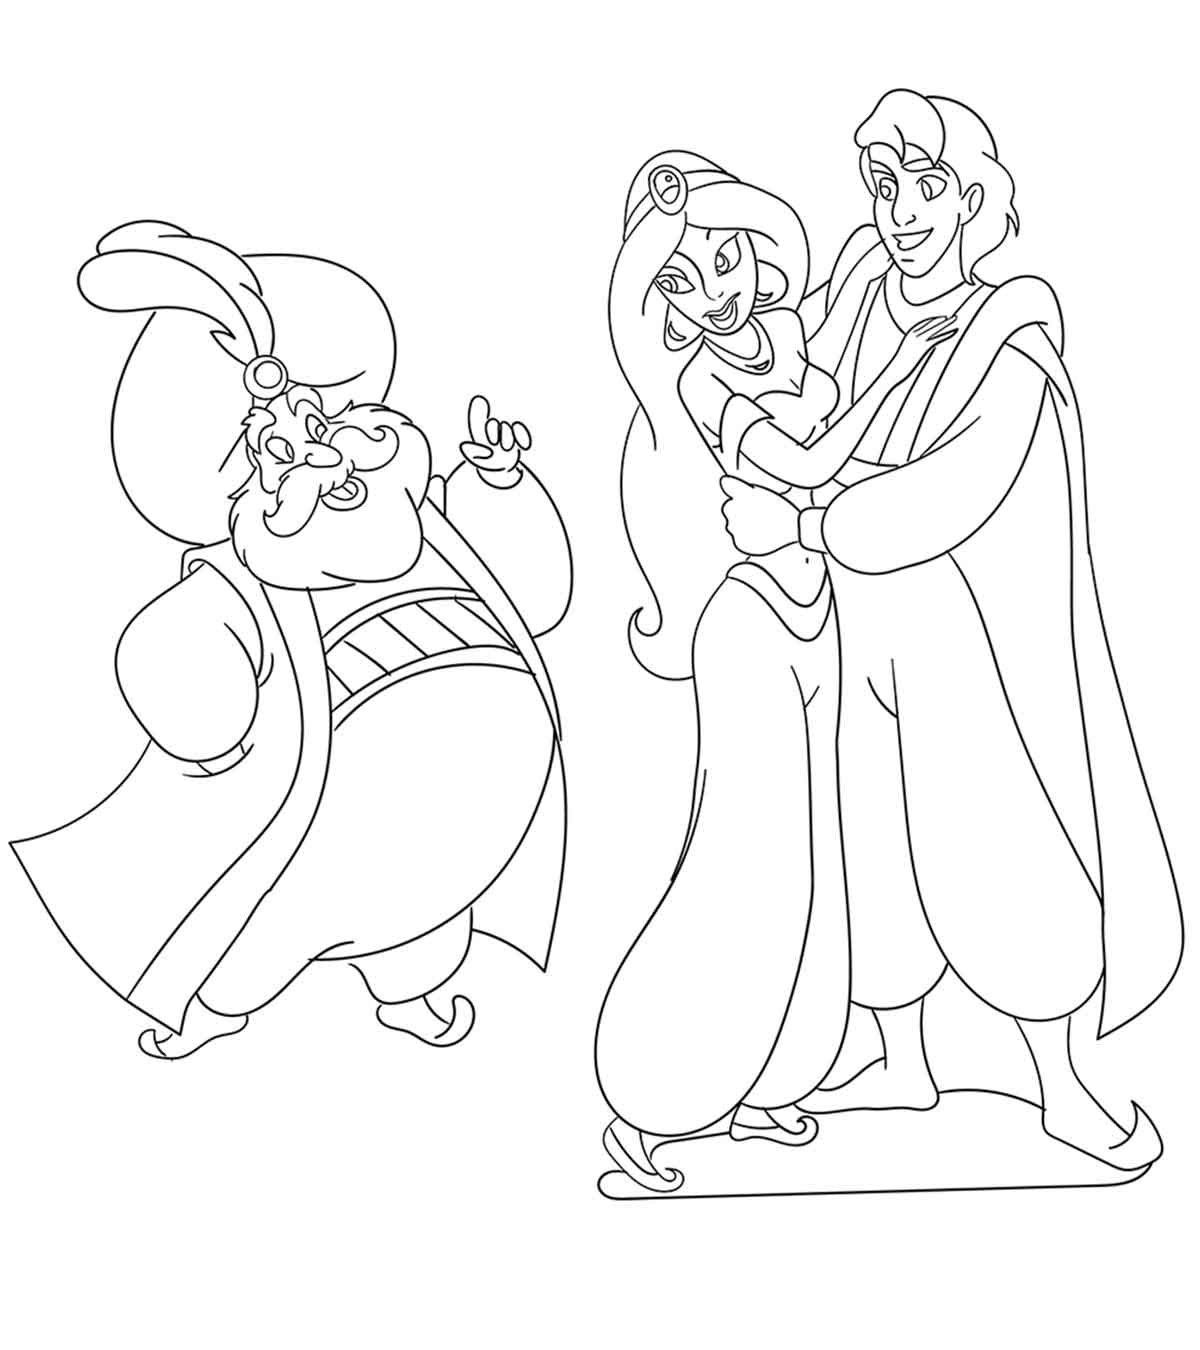 Top 10 Princess Jasmine Coloring Pages For Your Toddler